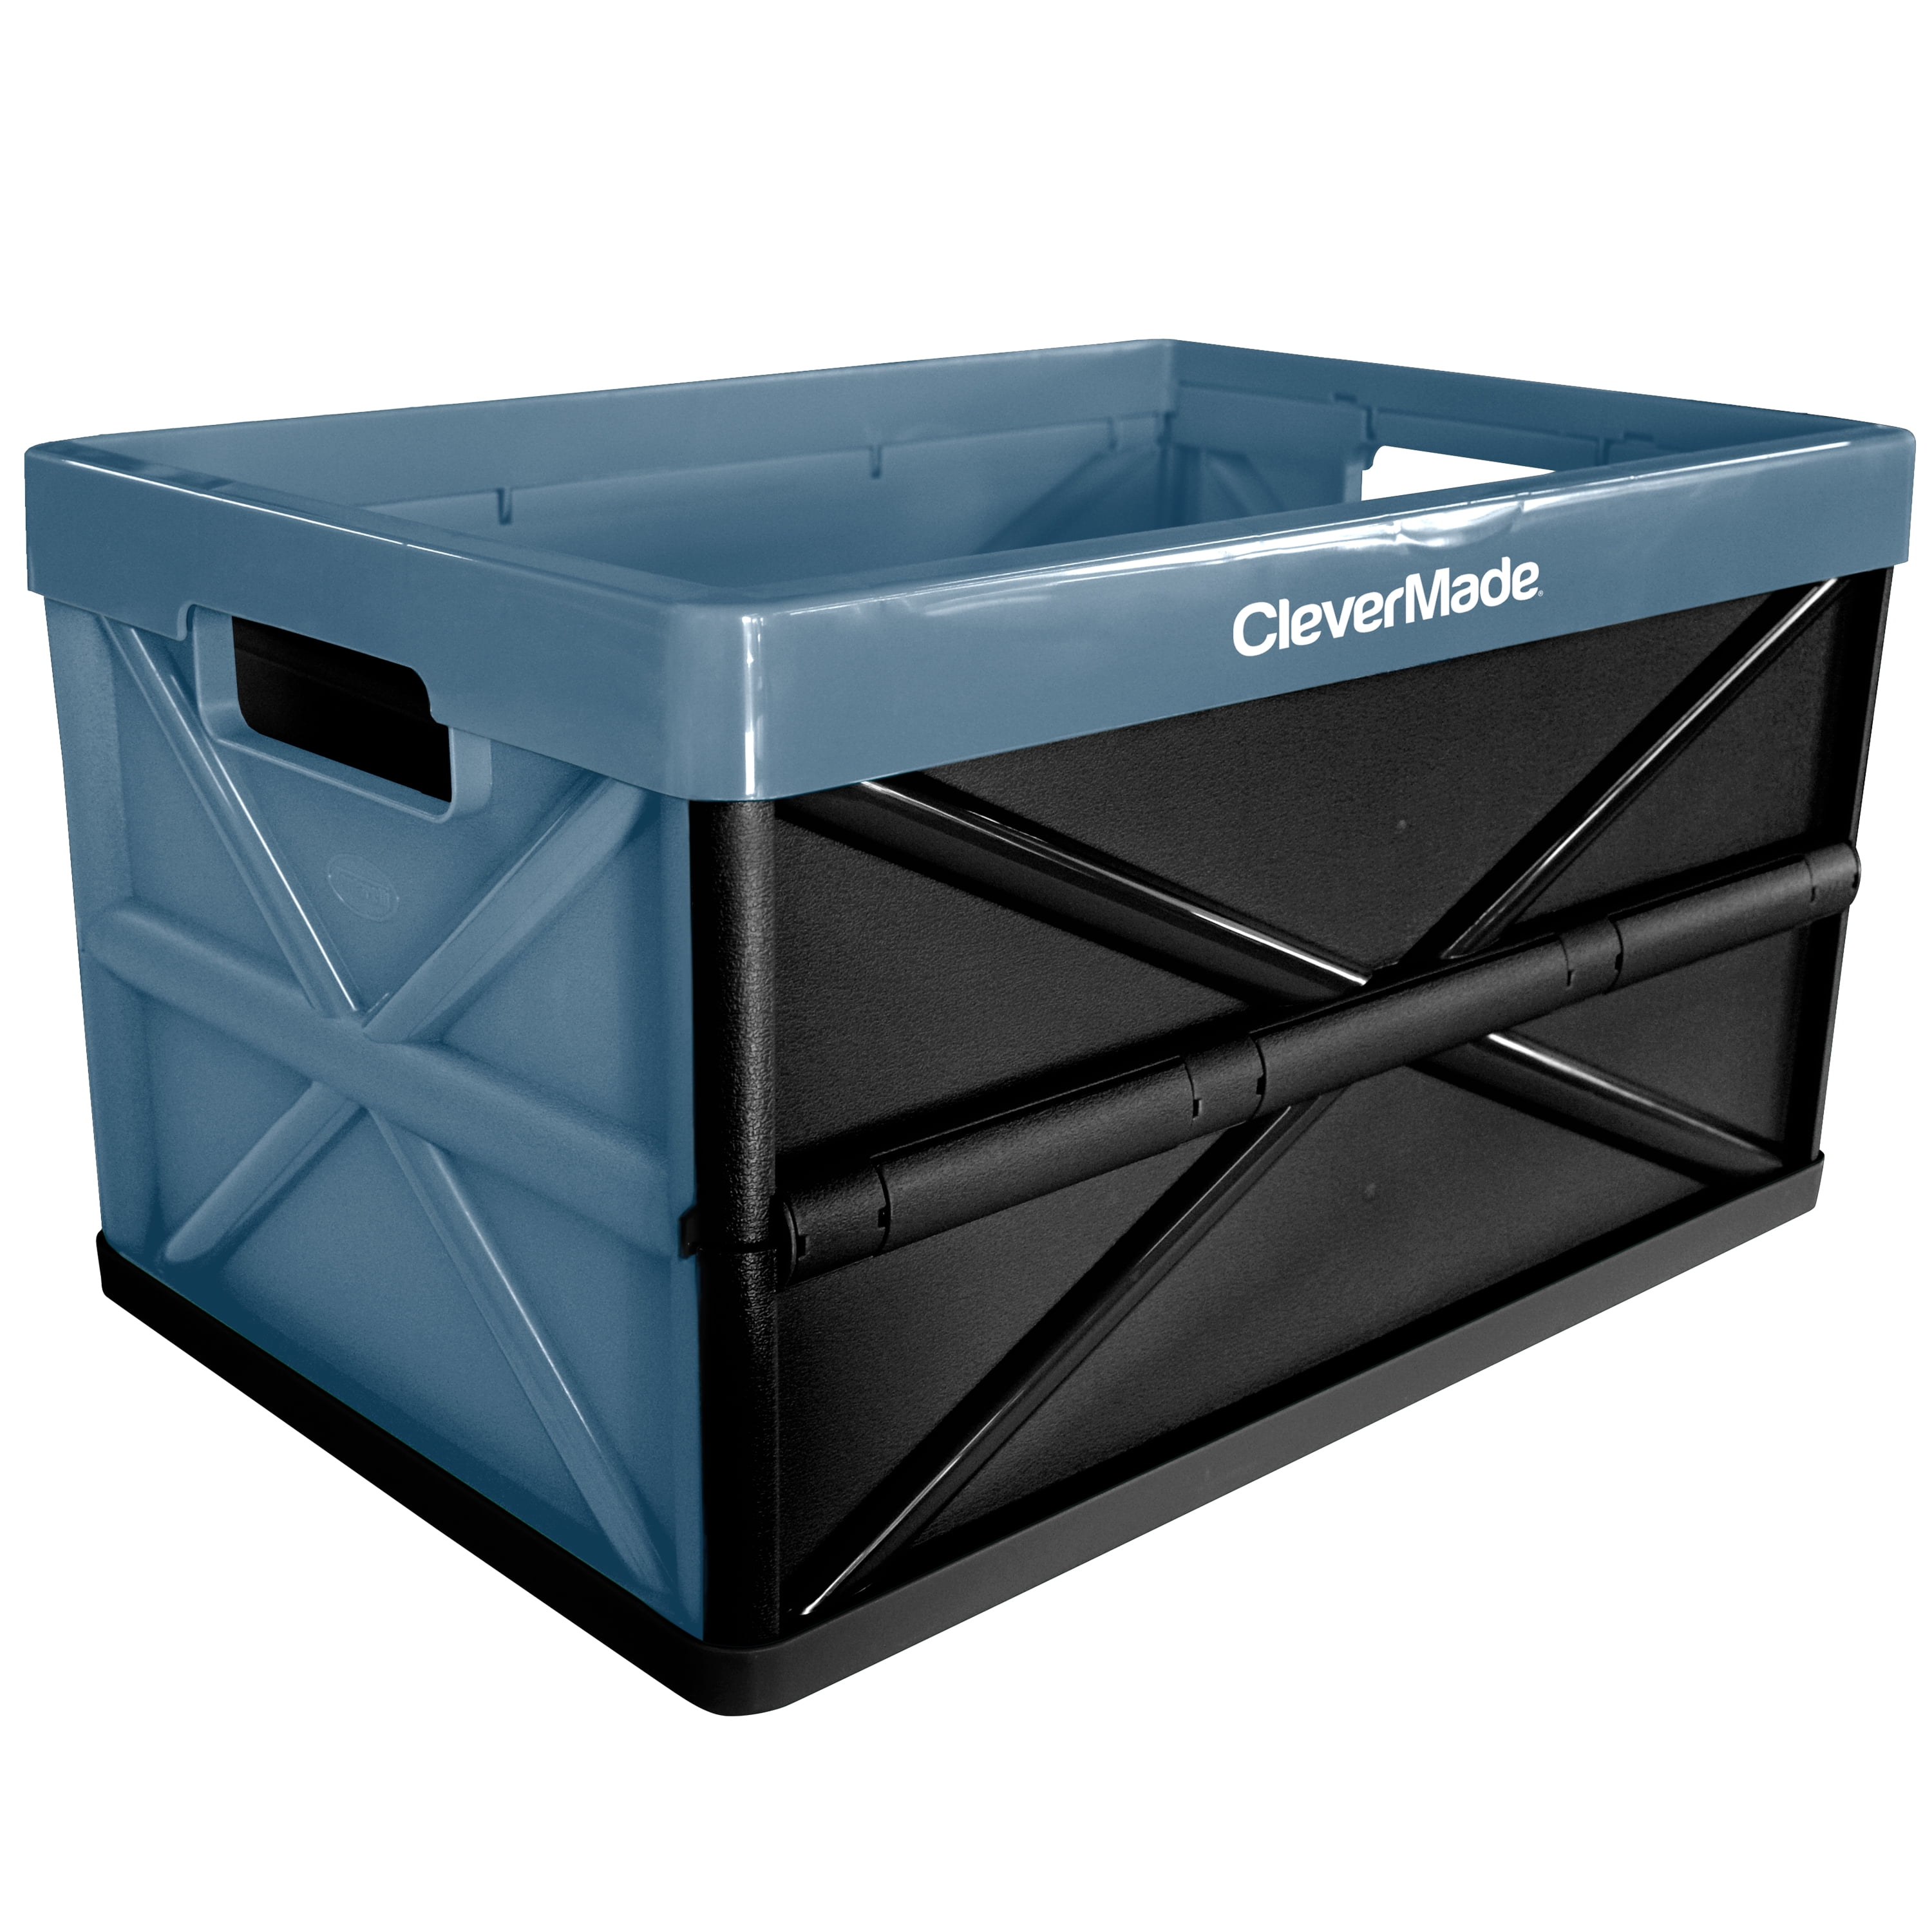 Solid Wall 3 Pack Neptune Blue CleverMade 46L Collapsible Storage Bins with Lids Folding Plastic Stackable Utility Crates